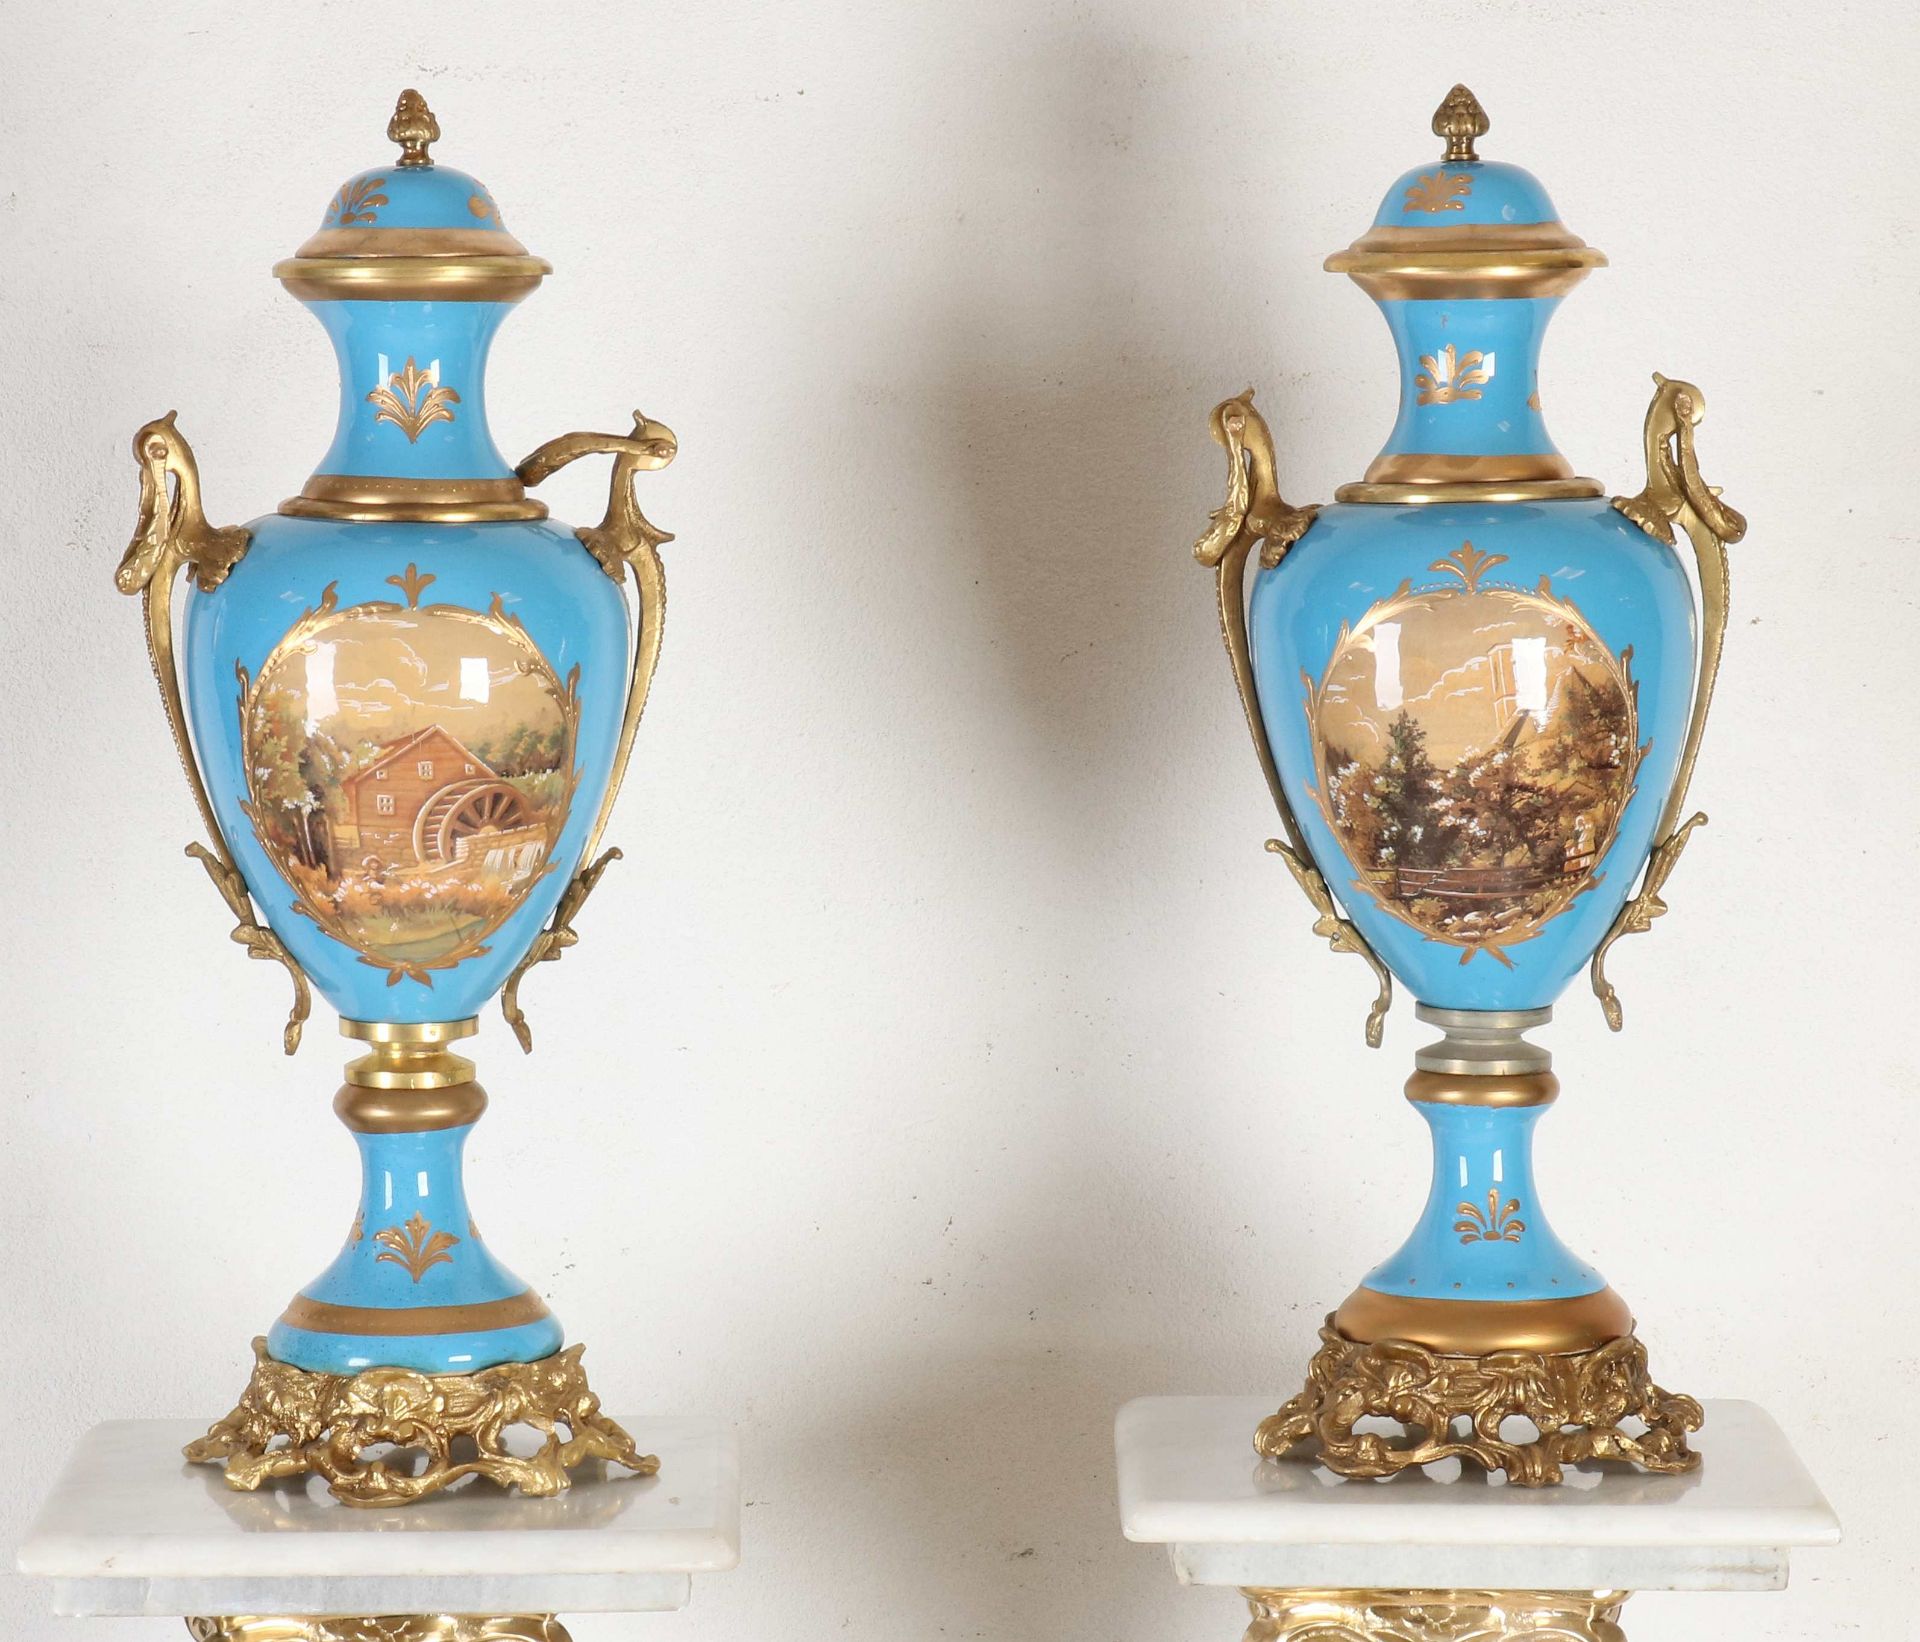 Two Sevres style piedestals + vases - Image 3 of 3